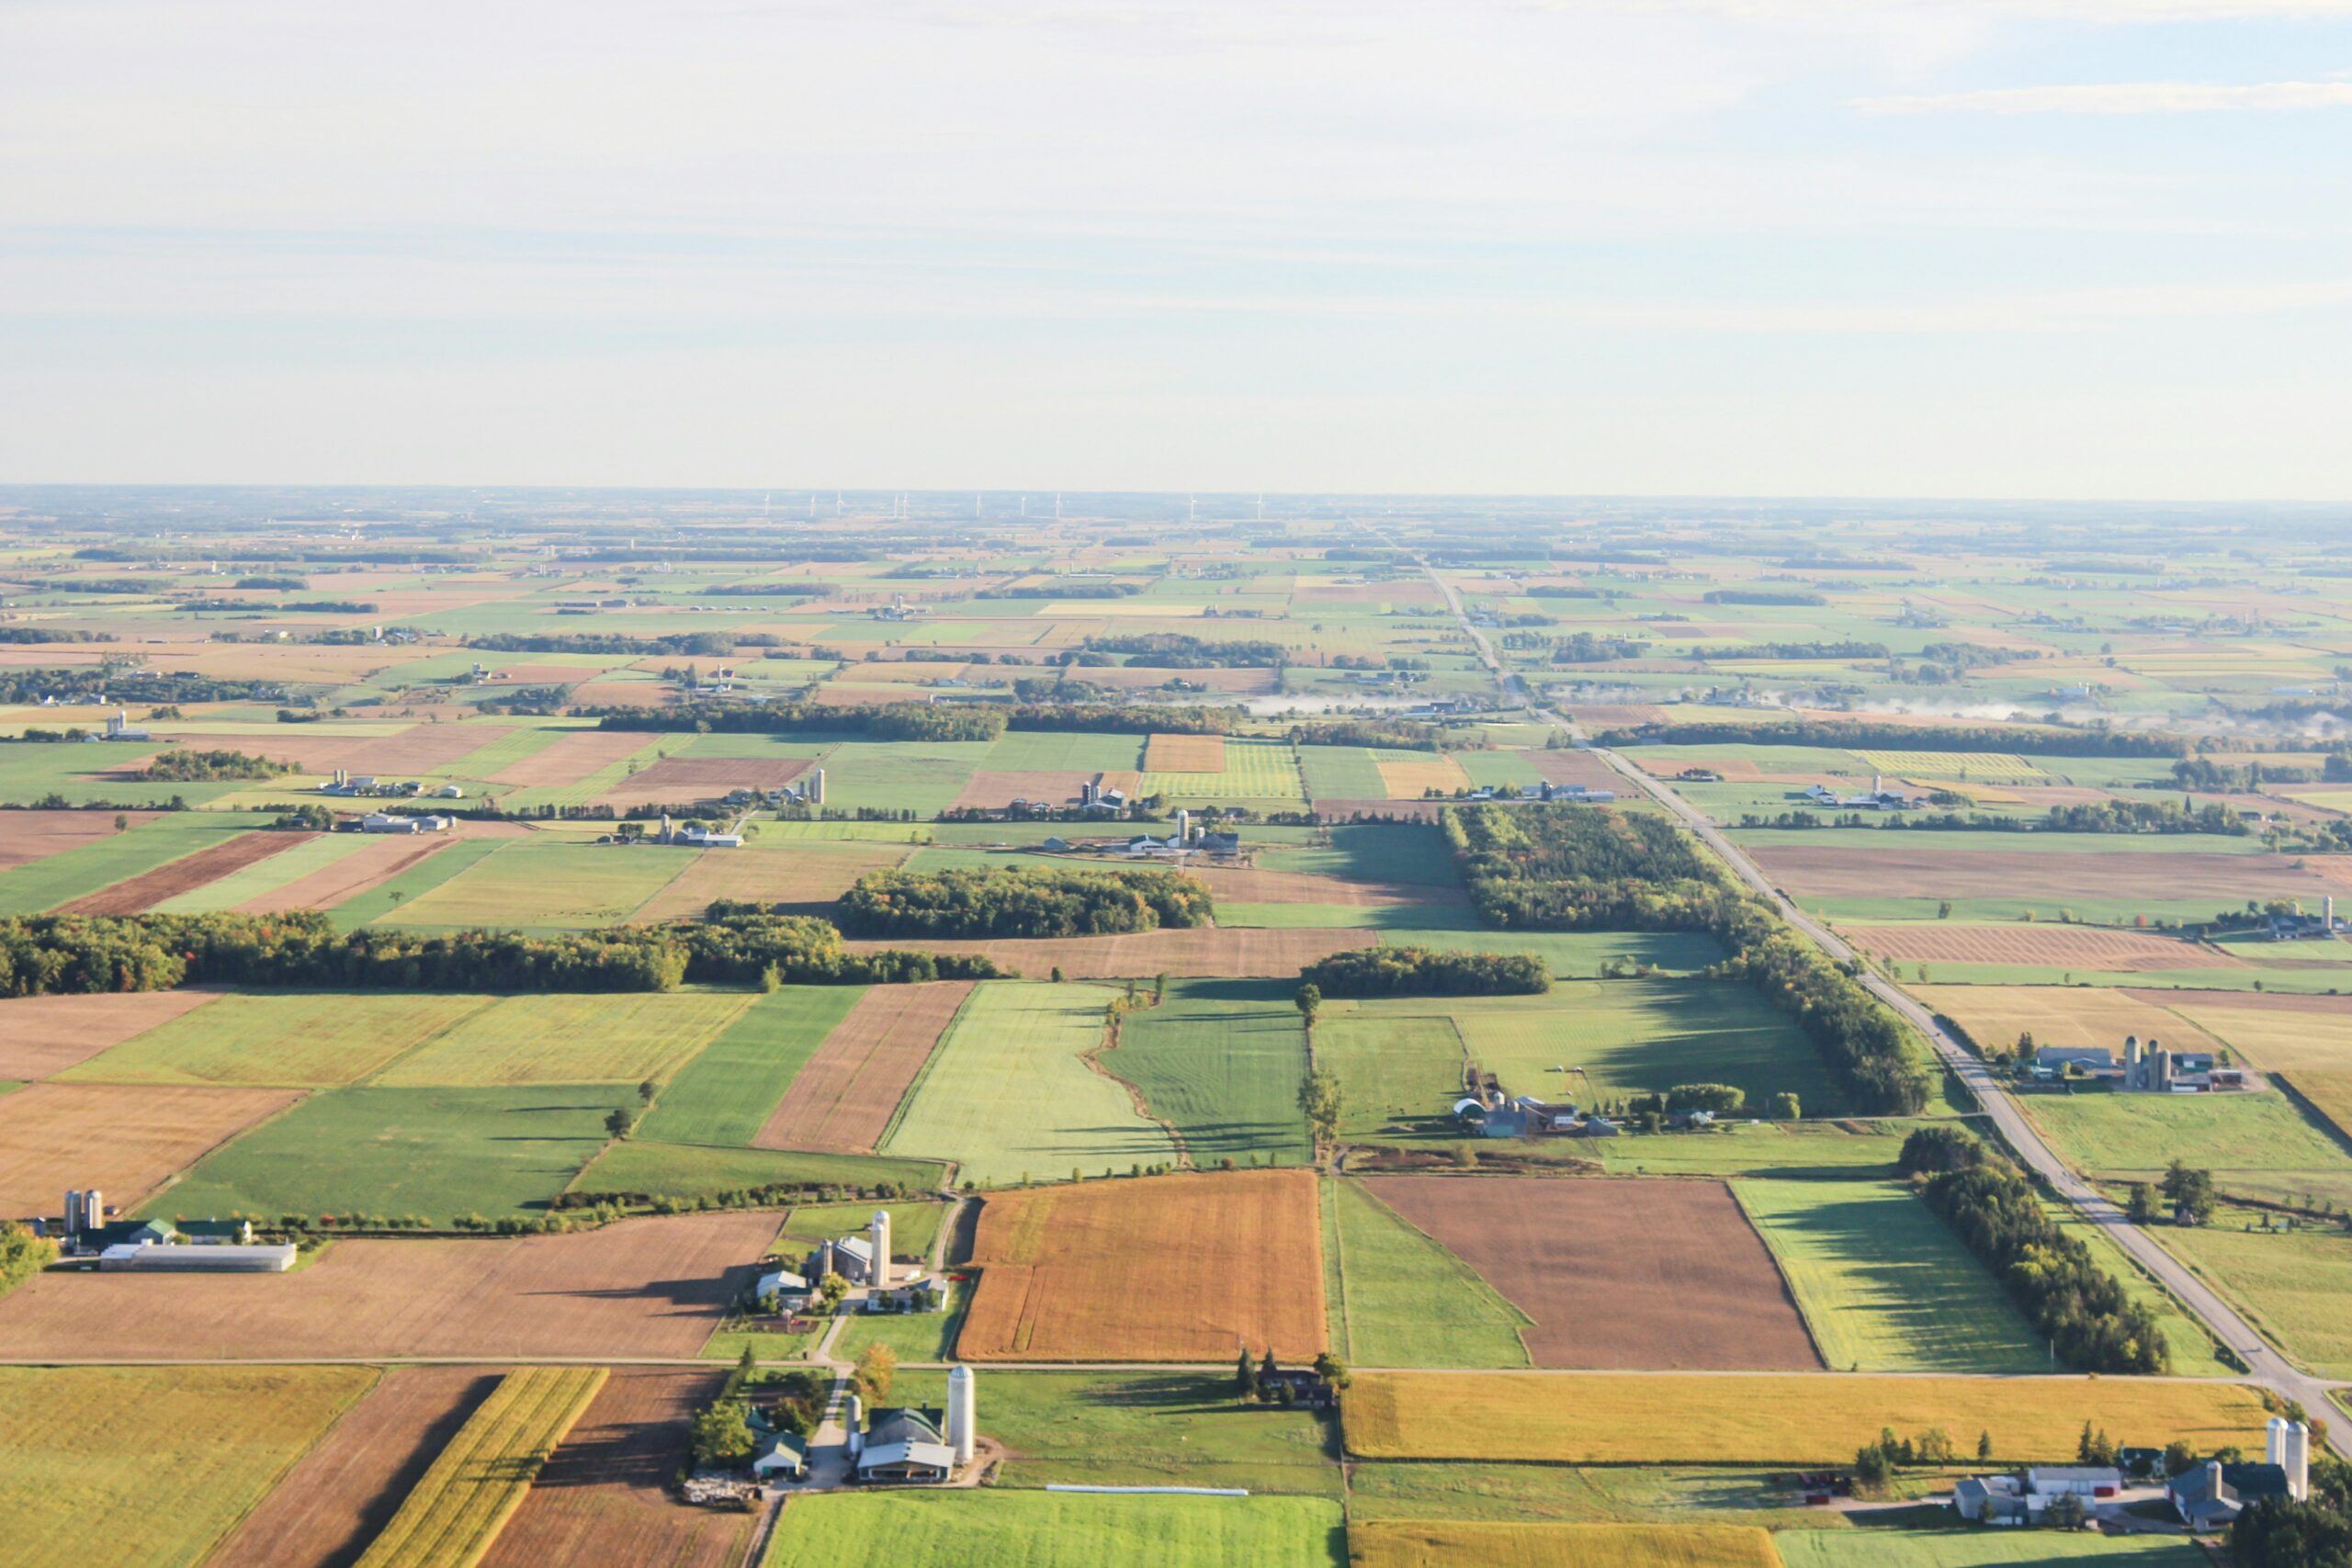 This is an aerial photo of farming land in BC. There are numerous properties and farming plots.